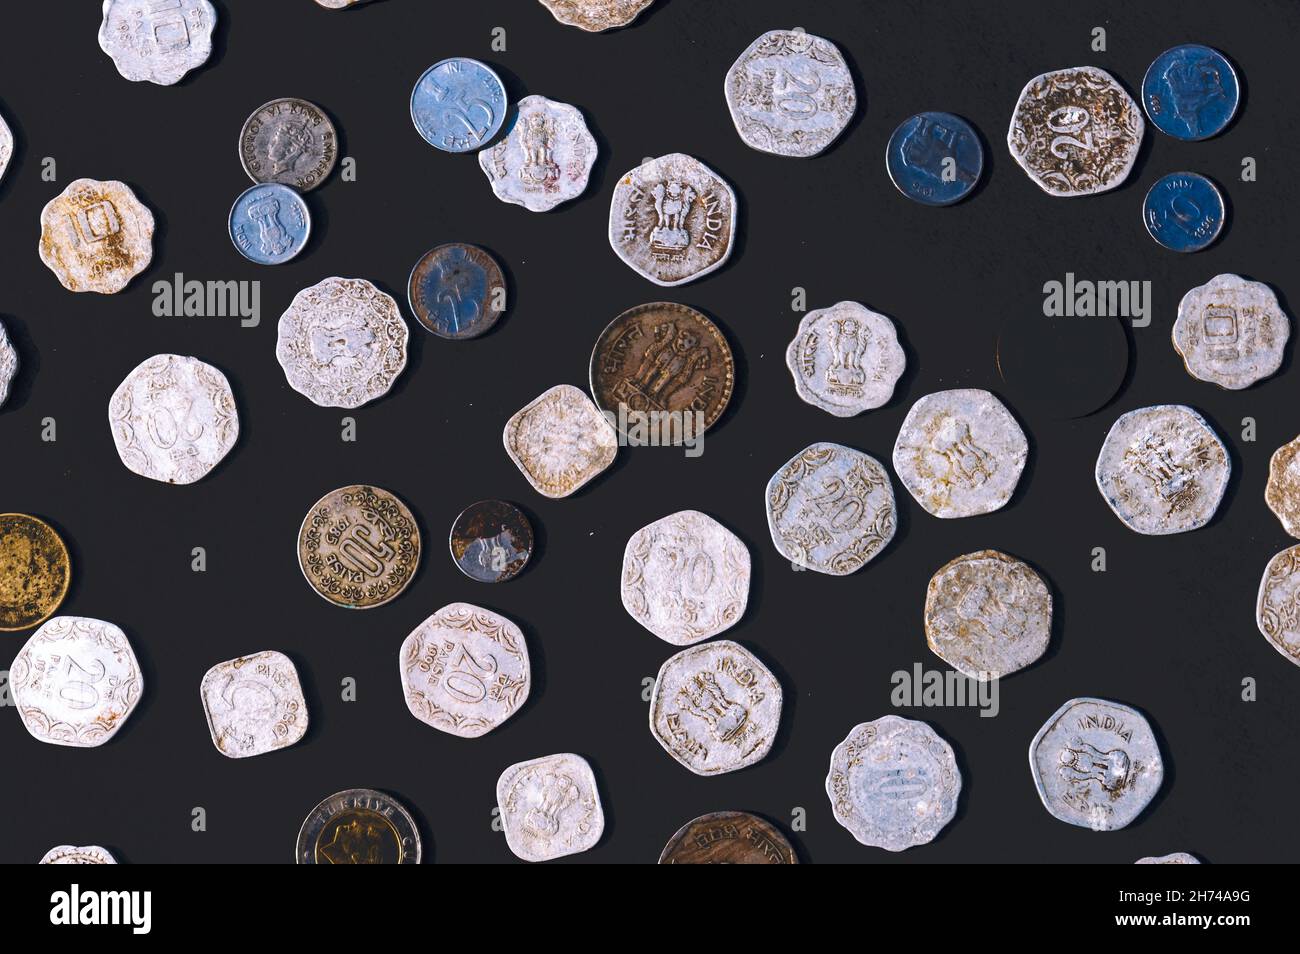 Mix of old antique obsolete Indian Rupee Coin currency on rustic floor. Full Frame. Table Top View. Close Up Stock Photo